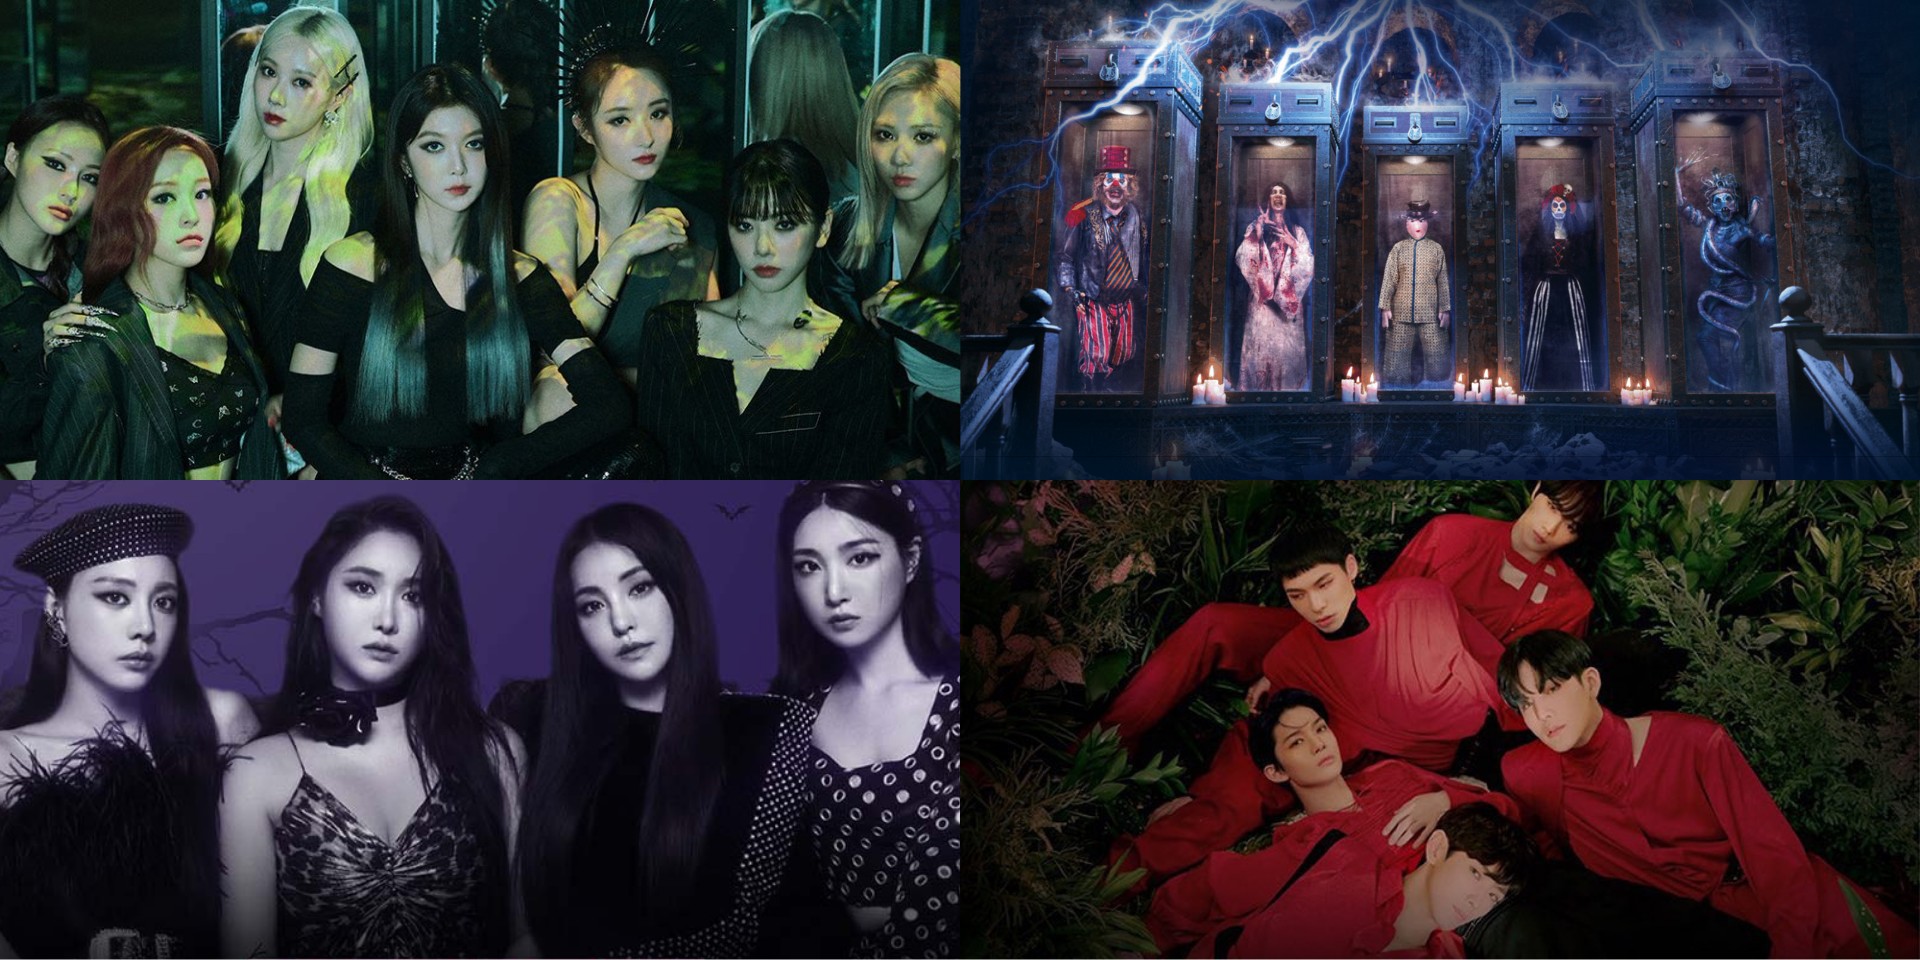 Bandwagon's 2021 guide to Halloween gigs and events with Dreamcatcher, Brave Girls, CIX, and more